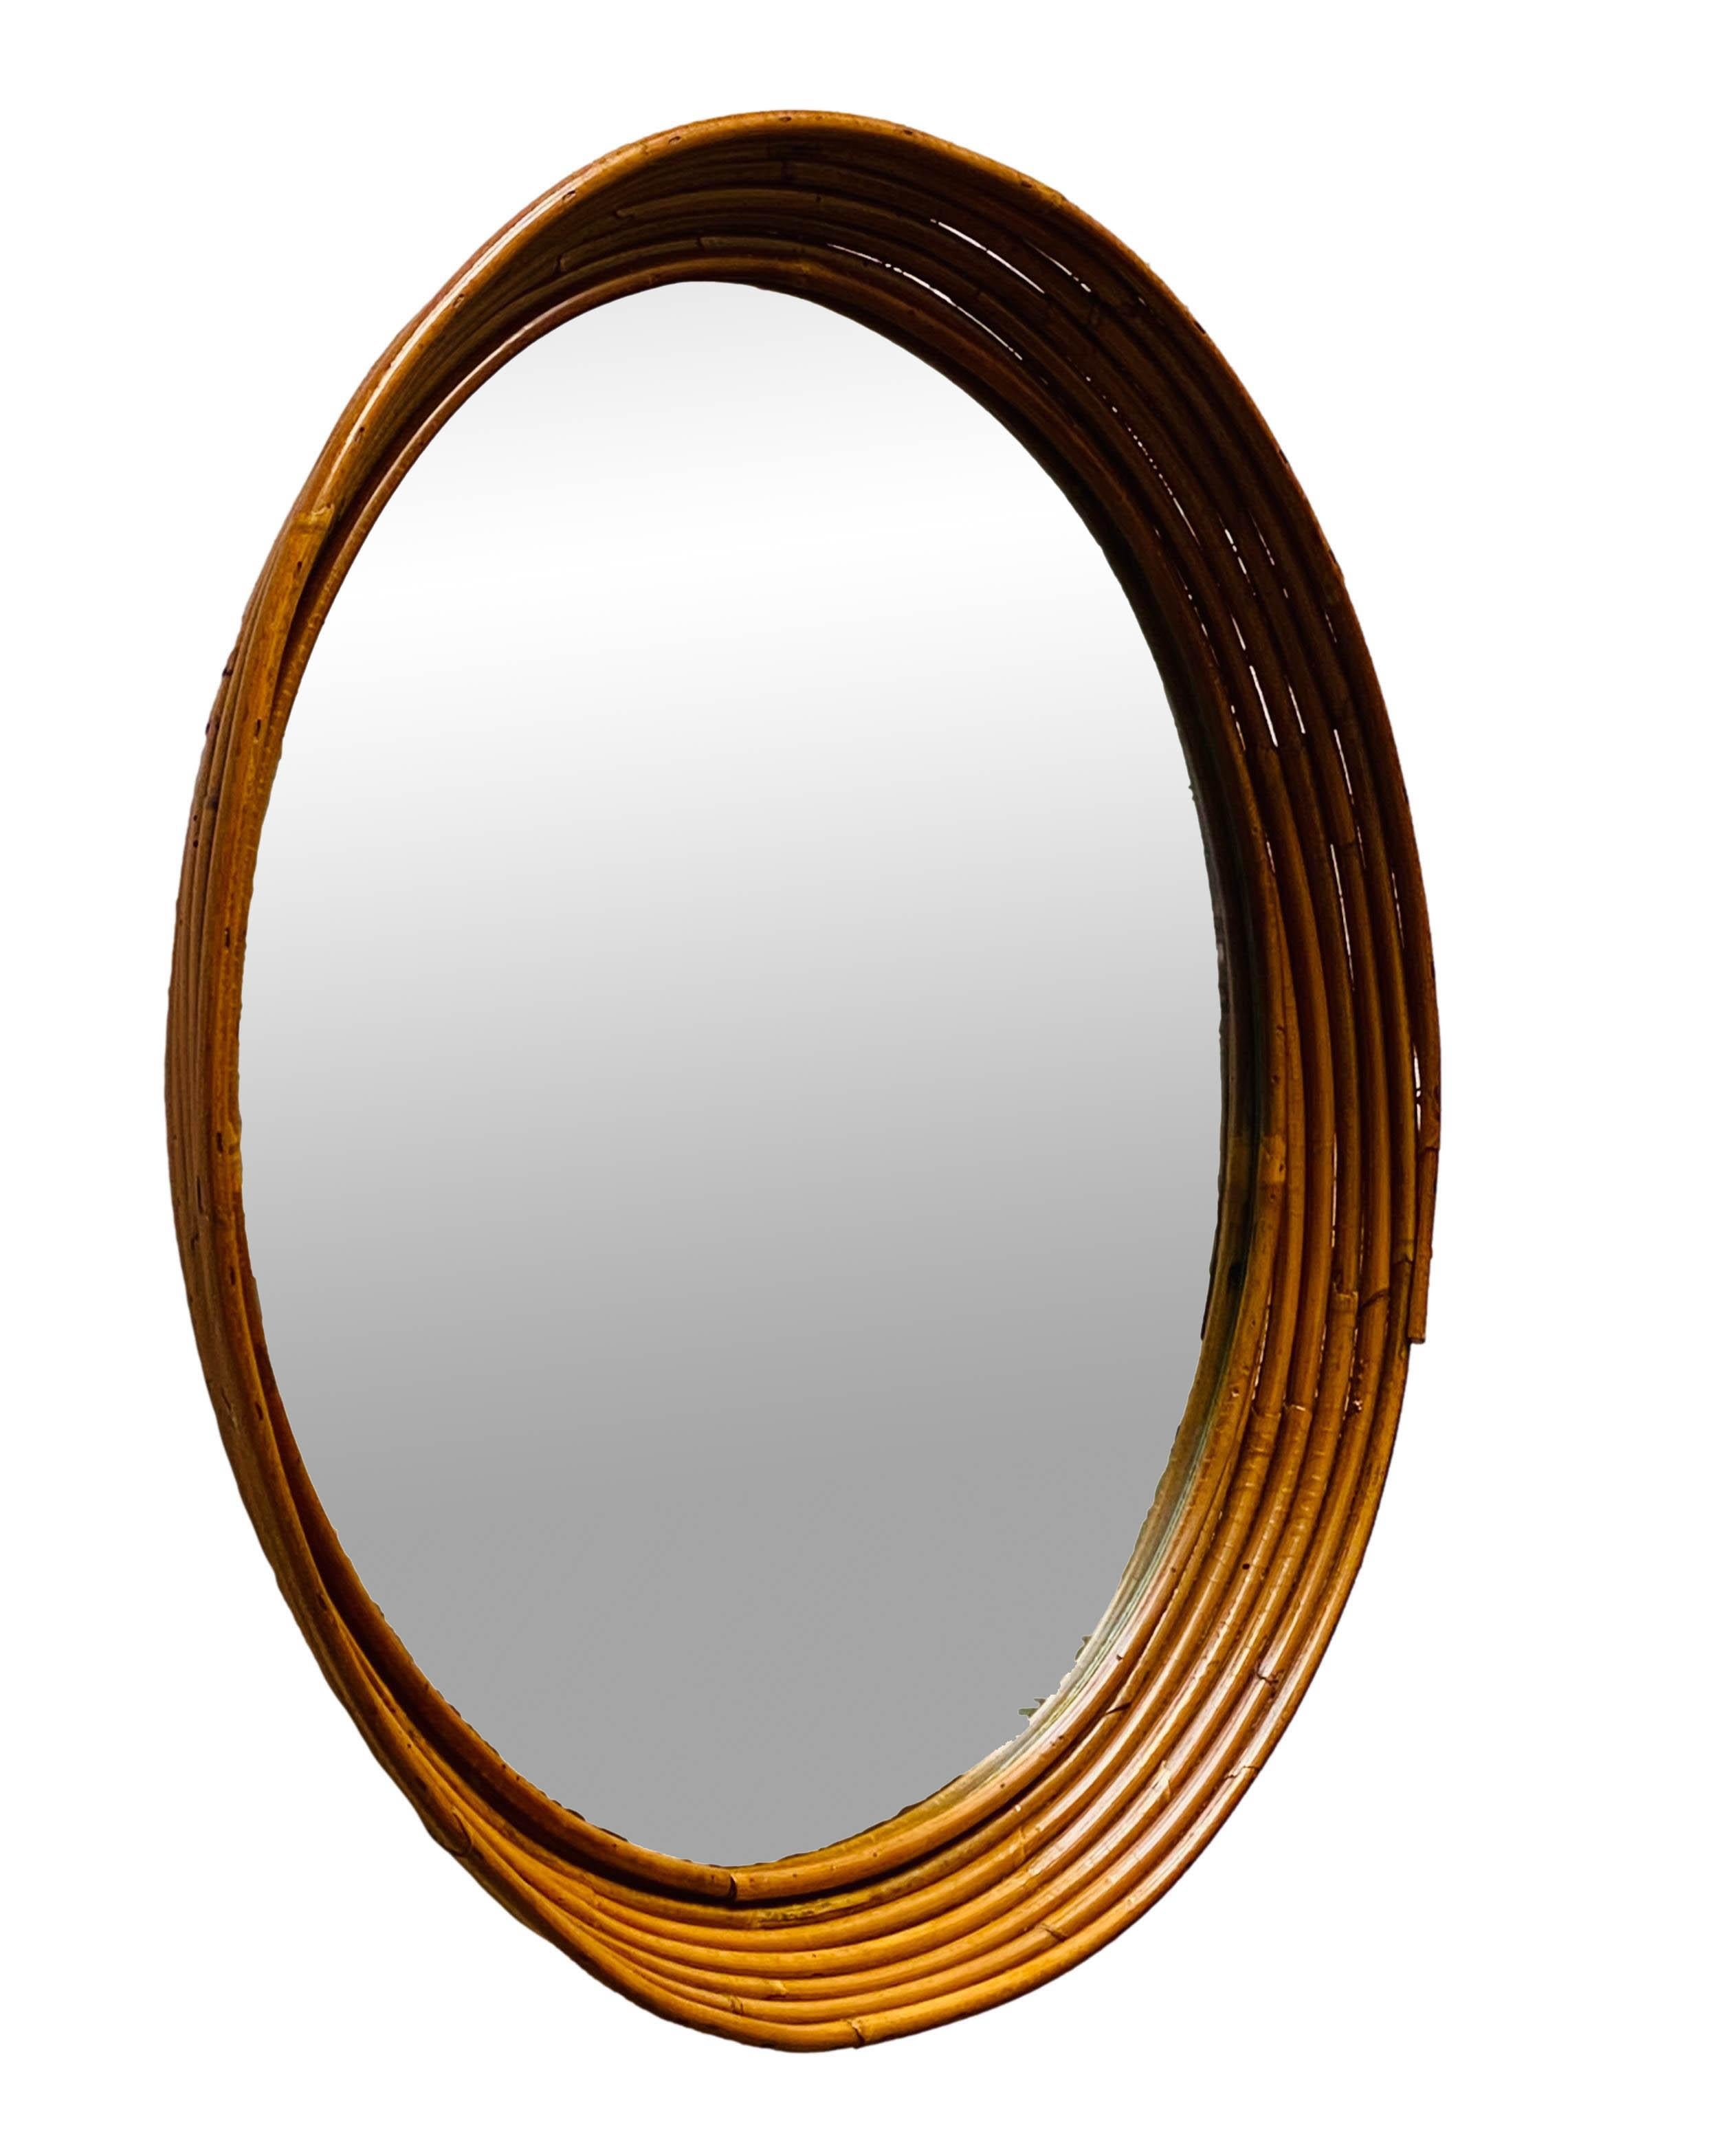 Stunning Italian rattan or bamboo wall mirror from the 1960s. The rounded frame is made of cane wicker with a mirrored glass insert. No trademark visible.